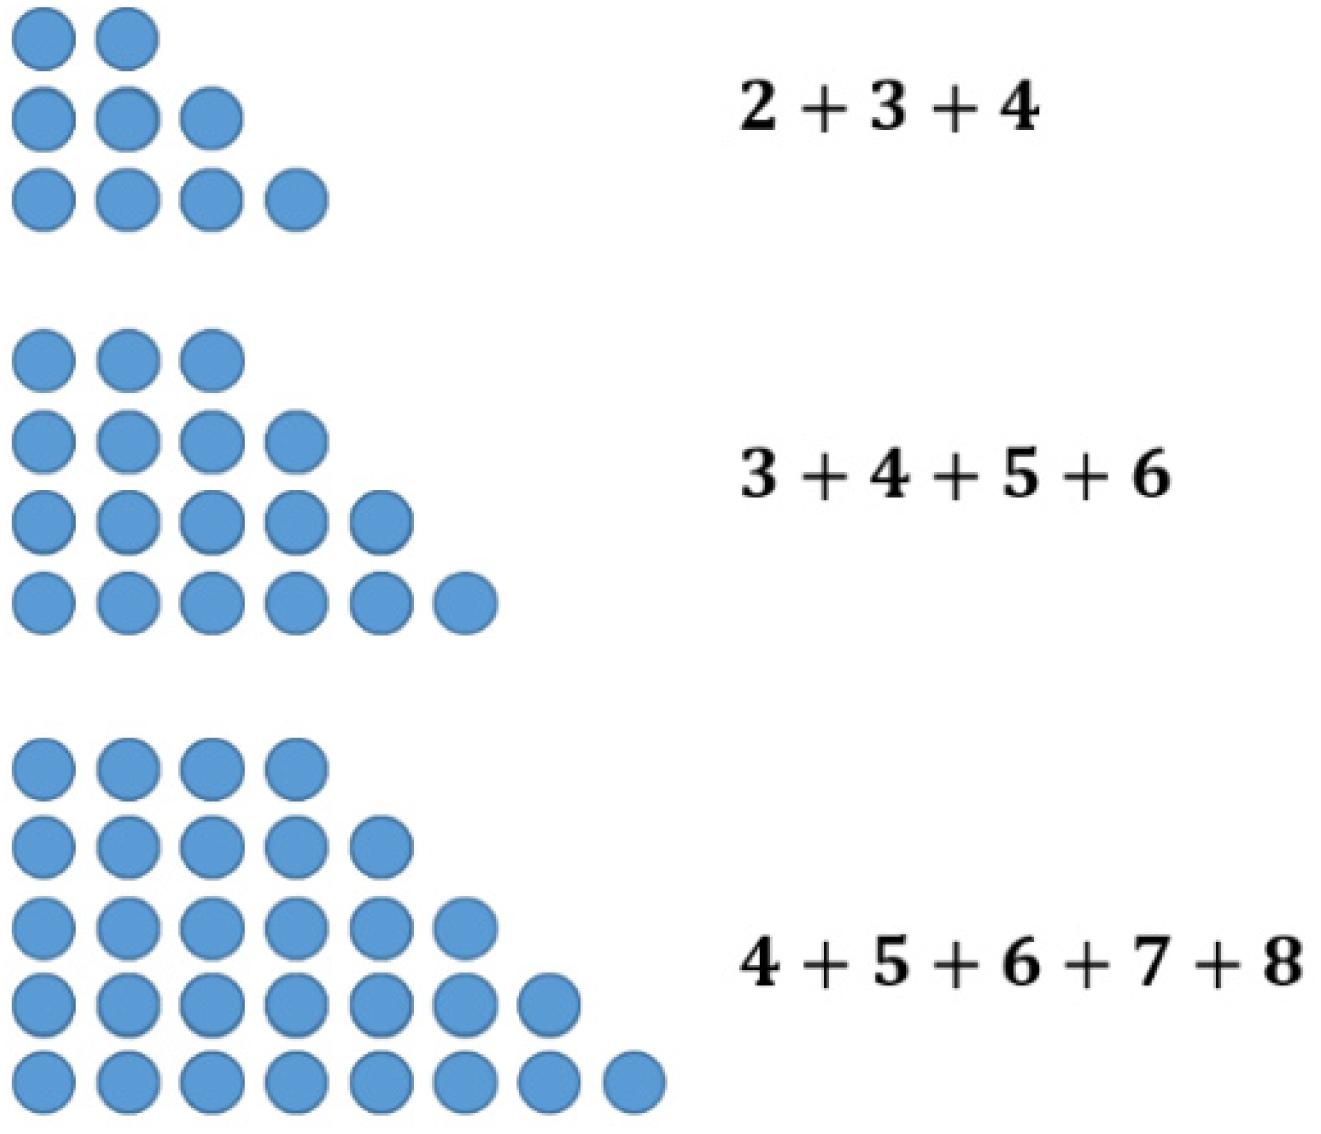 Frontiers Using Figurate Numbers In Elementary Number Theory Discussing A Useful Heuristic From The Perspectives Of Semiotics And Cognitive Psychology Psychology